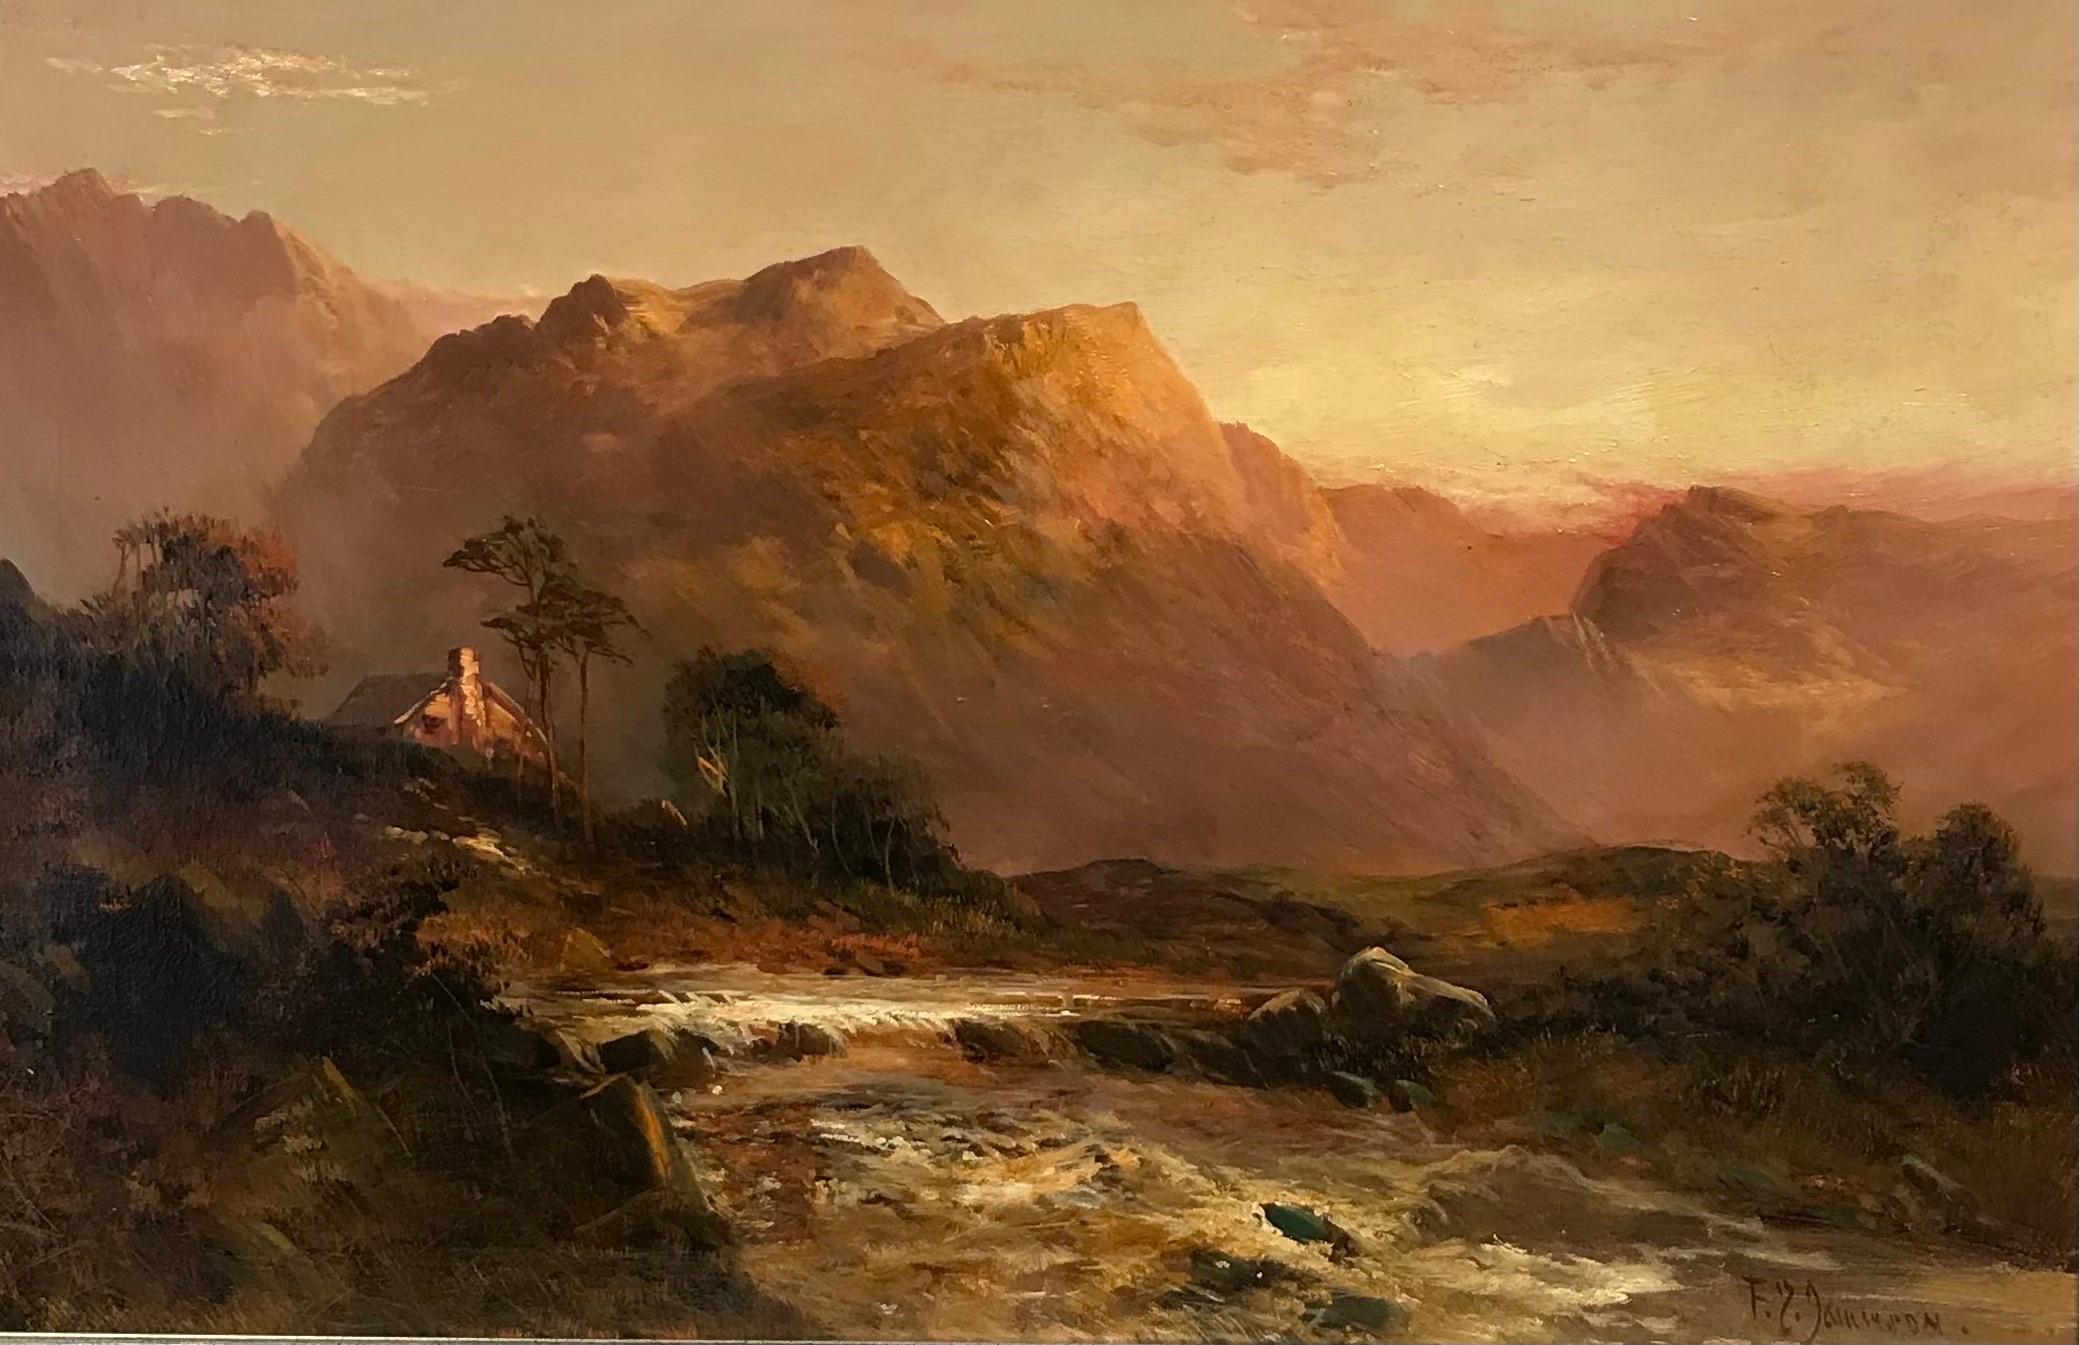 Francis E. Jamieson Landscape Painting - Antique Scottish Oil Painting Sunset Highland Glen with River Flowing through